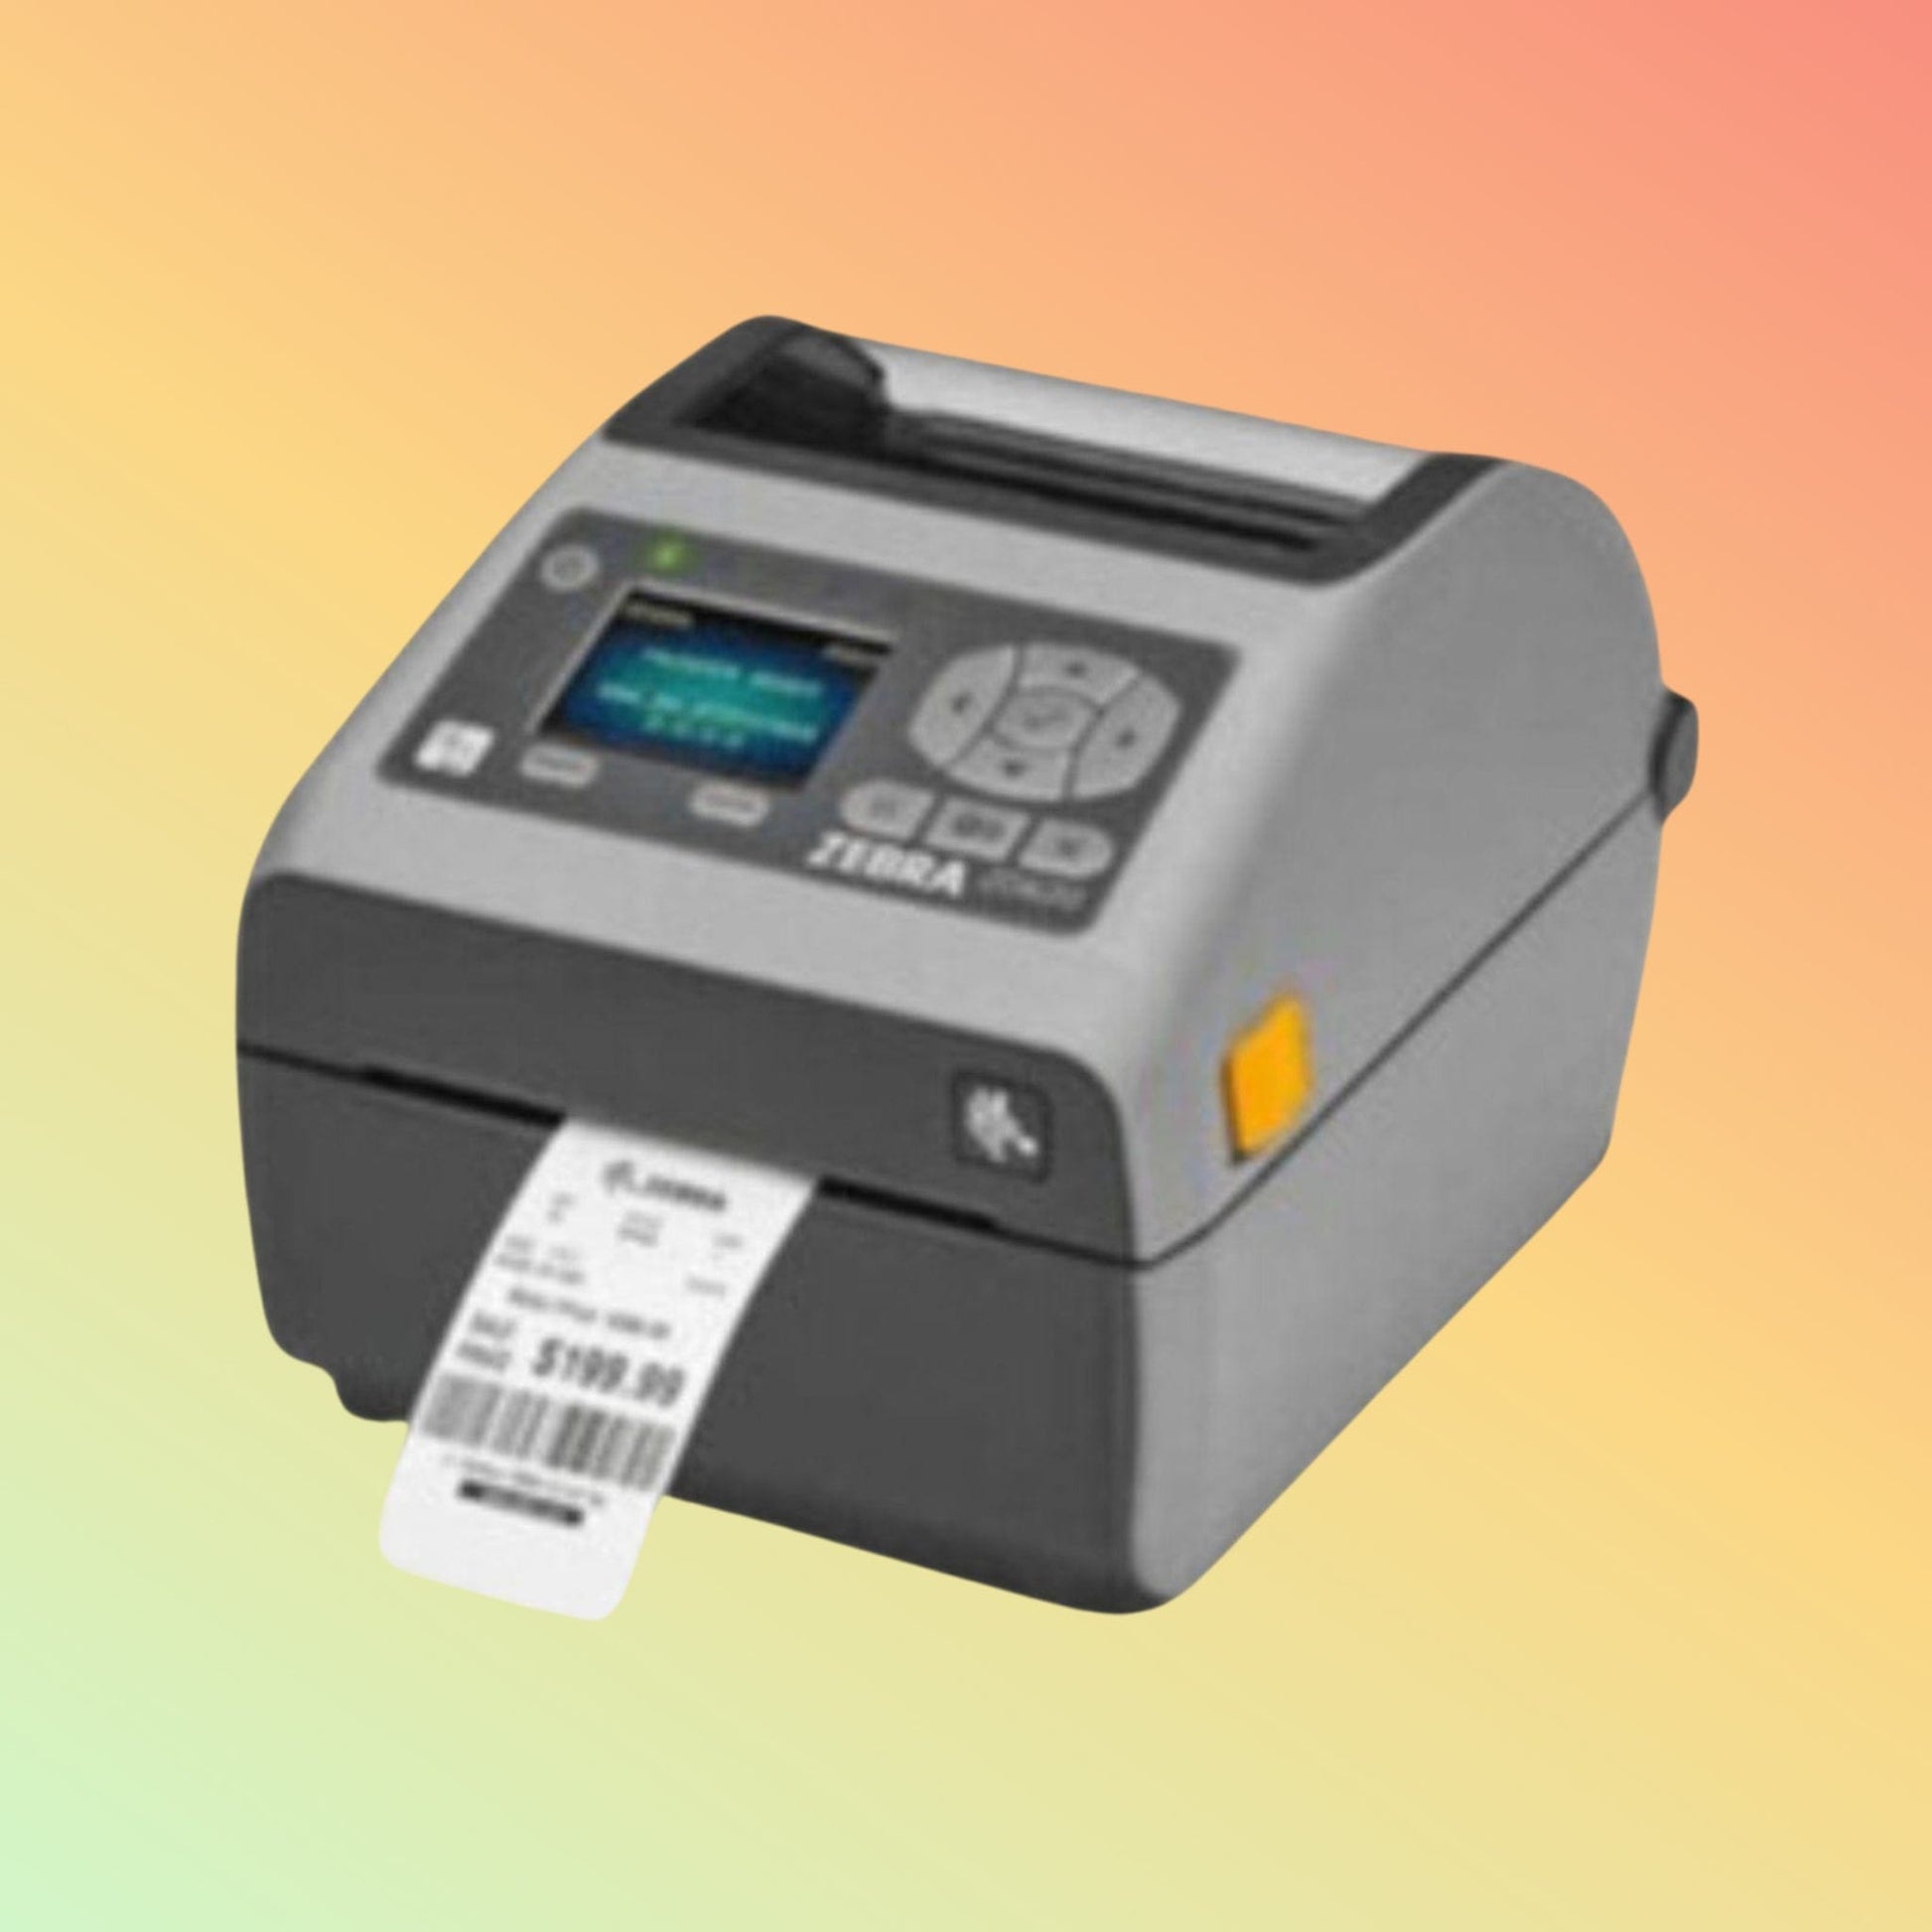 neotech.ae Direct Thermal Printers Zebra ZD420t Compact Desktop Printers | Easy Setup and Operation | Durability and Ruggedness | Fast and Reliable Printing